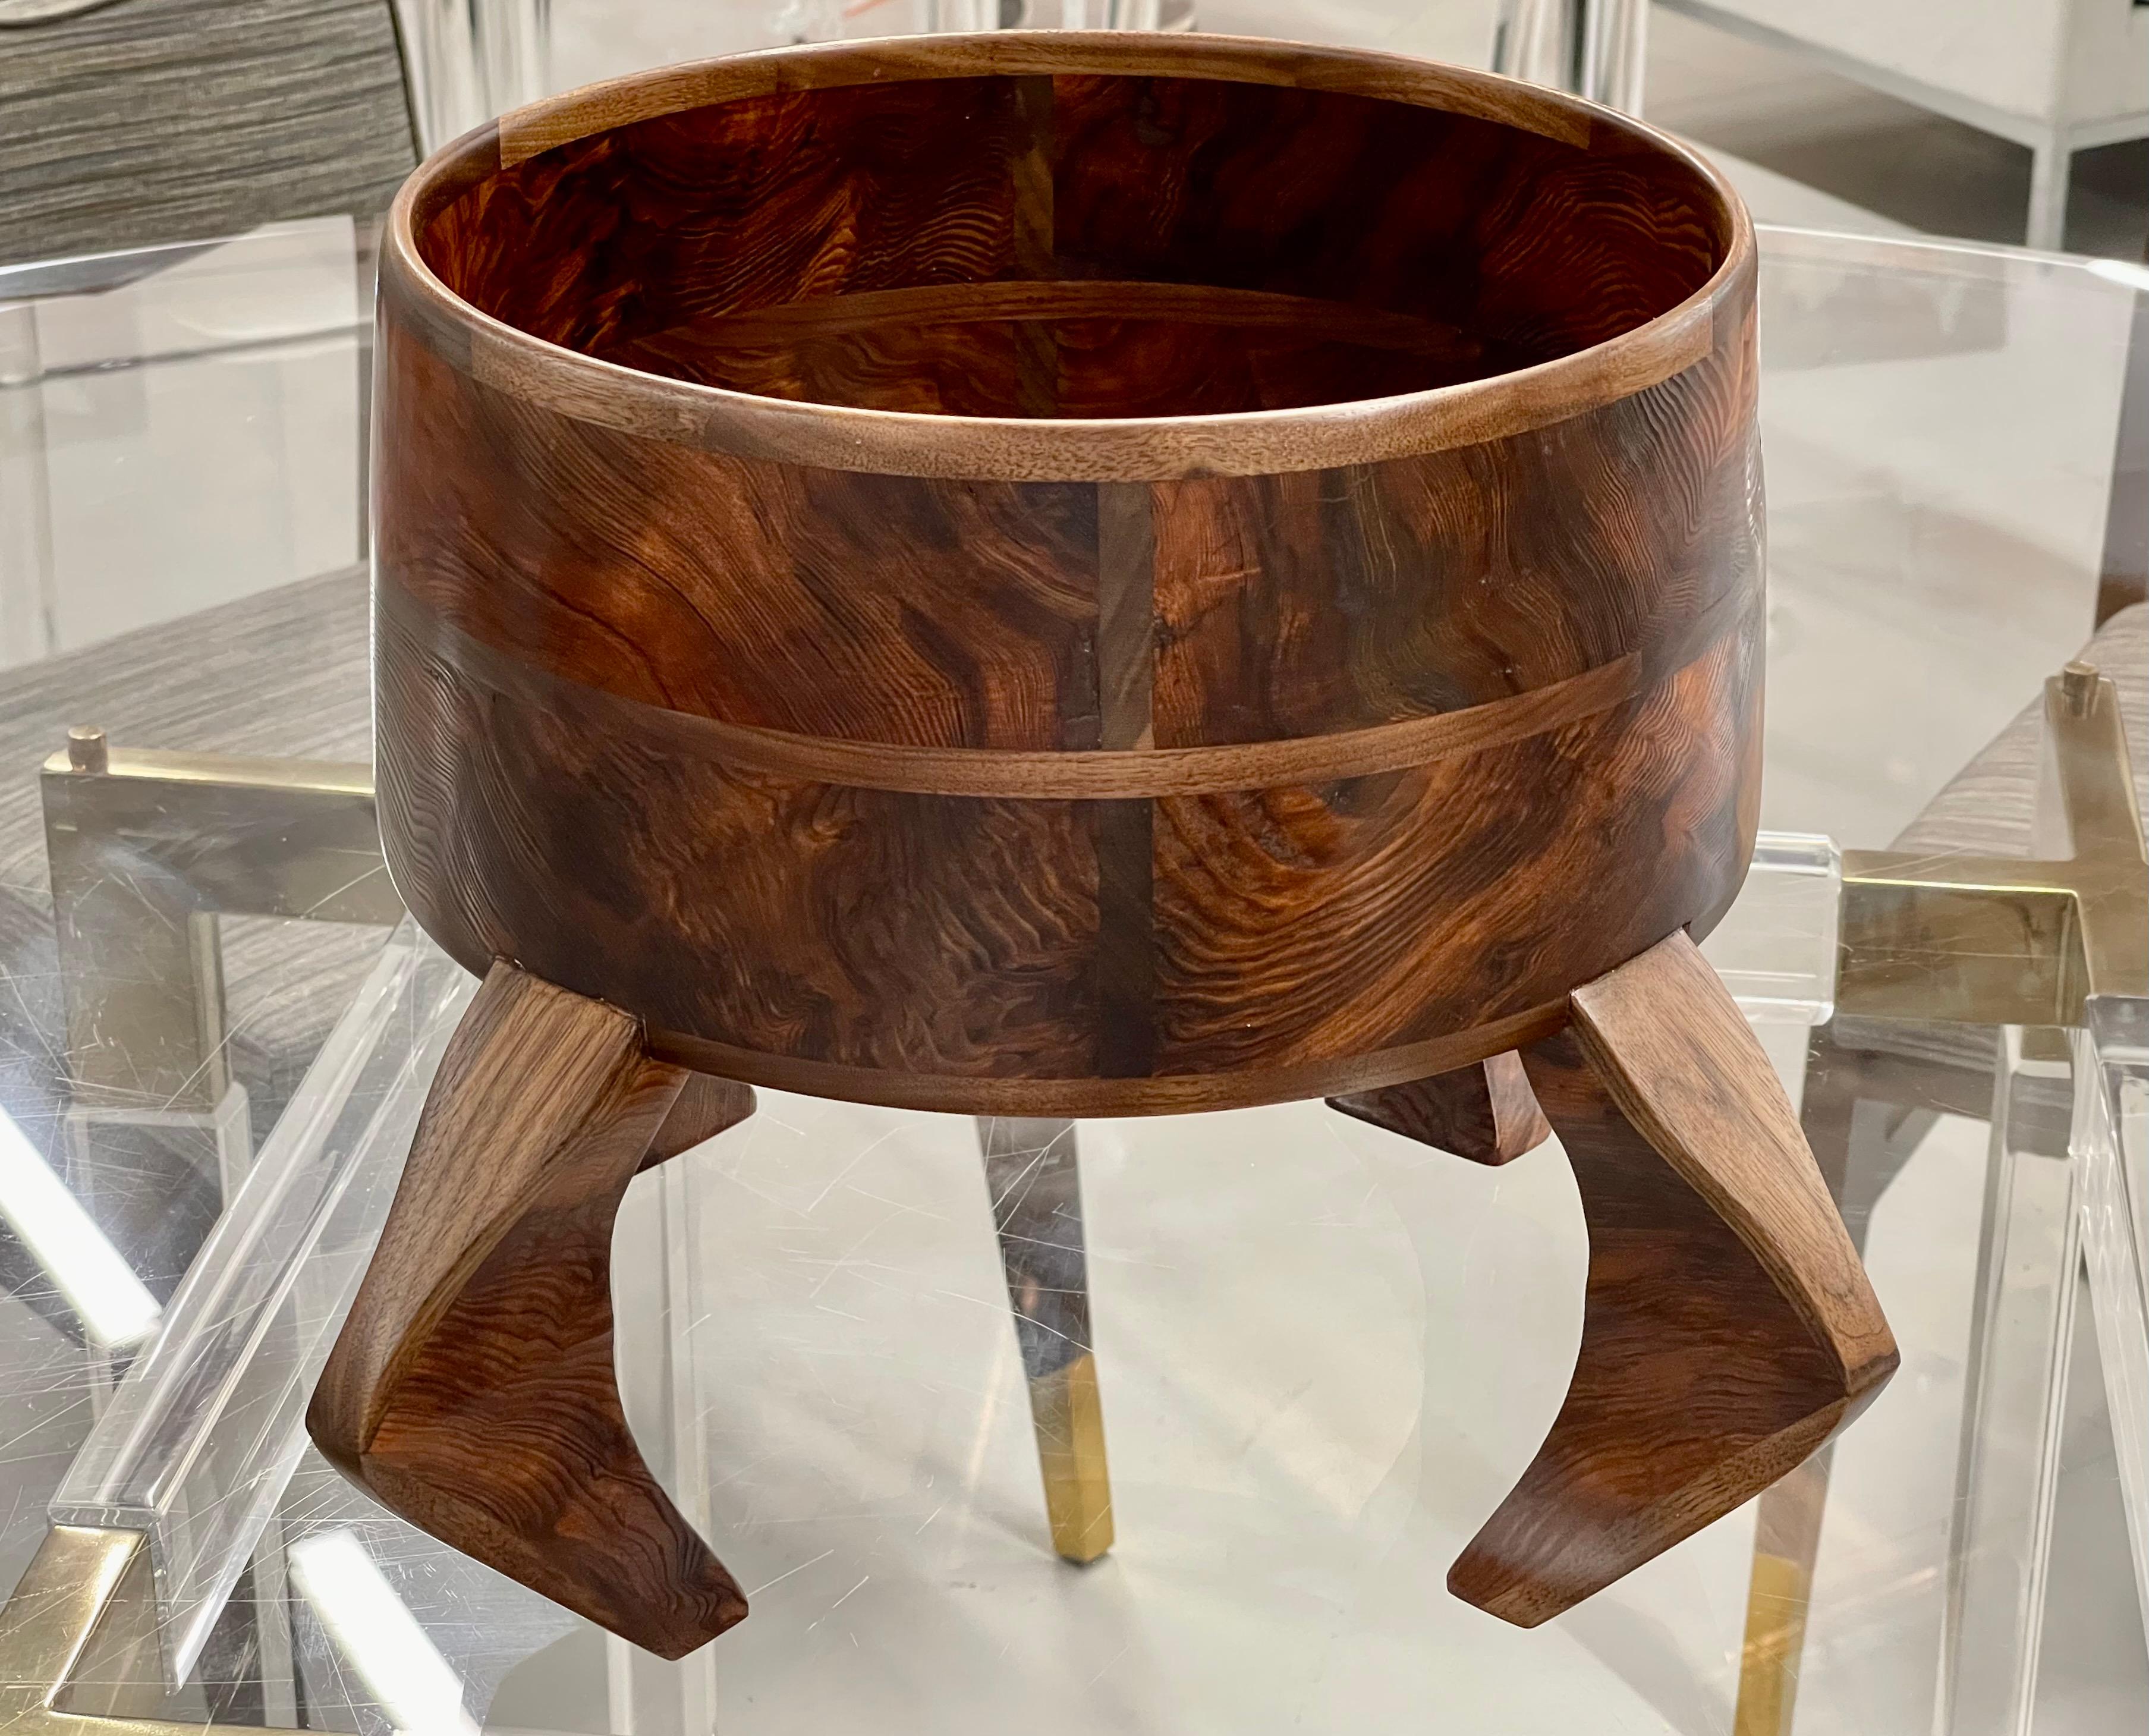 A beautiful craft vessel in walnut by the local Palm Springs artisan Ken Gamet. Made in 2021 in has great detail and presence. Signed on the base, and it is in excellent condition.